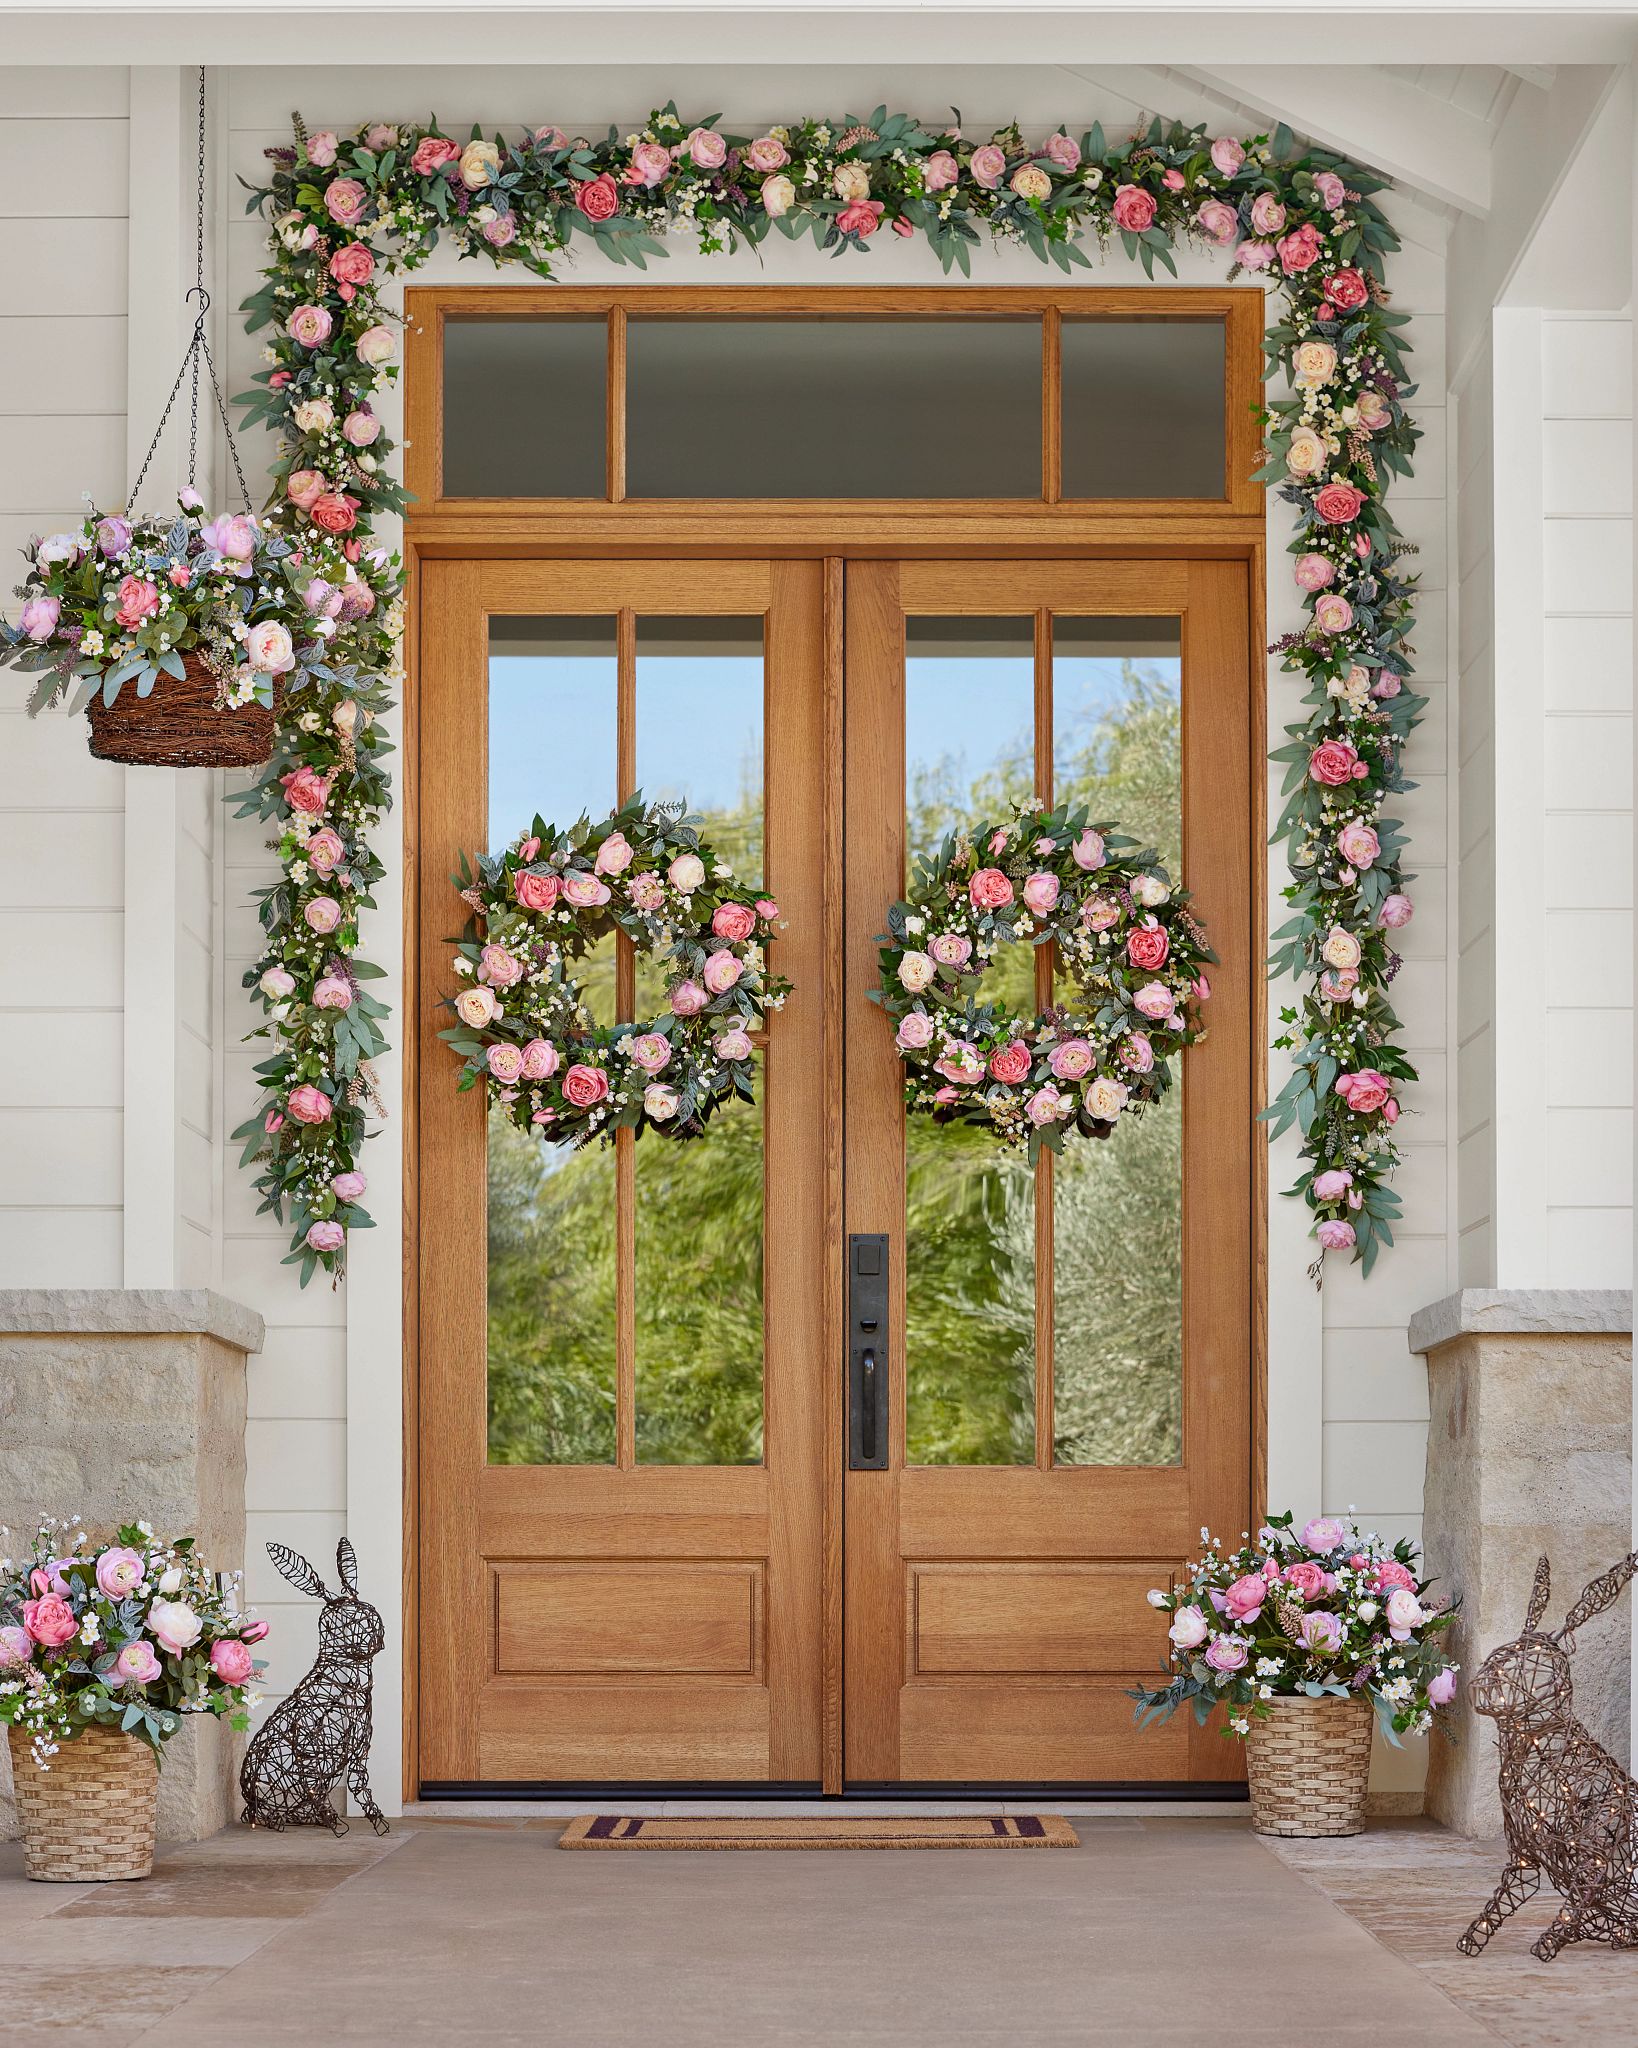 Front porch decorated with pink flower wreaths, garlands, and hanging baskets